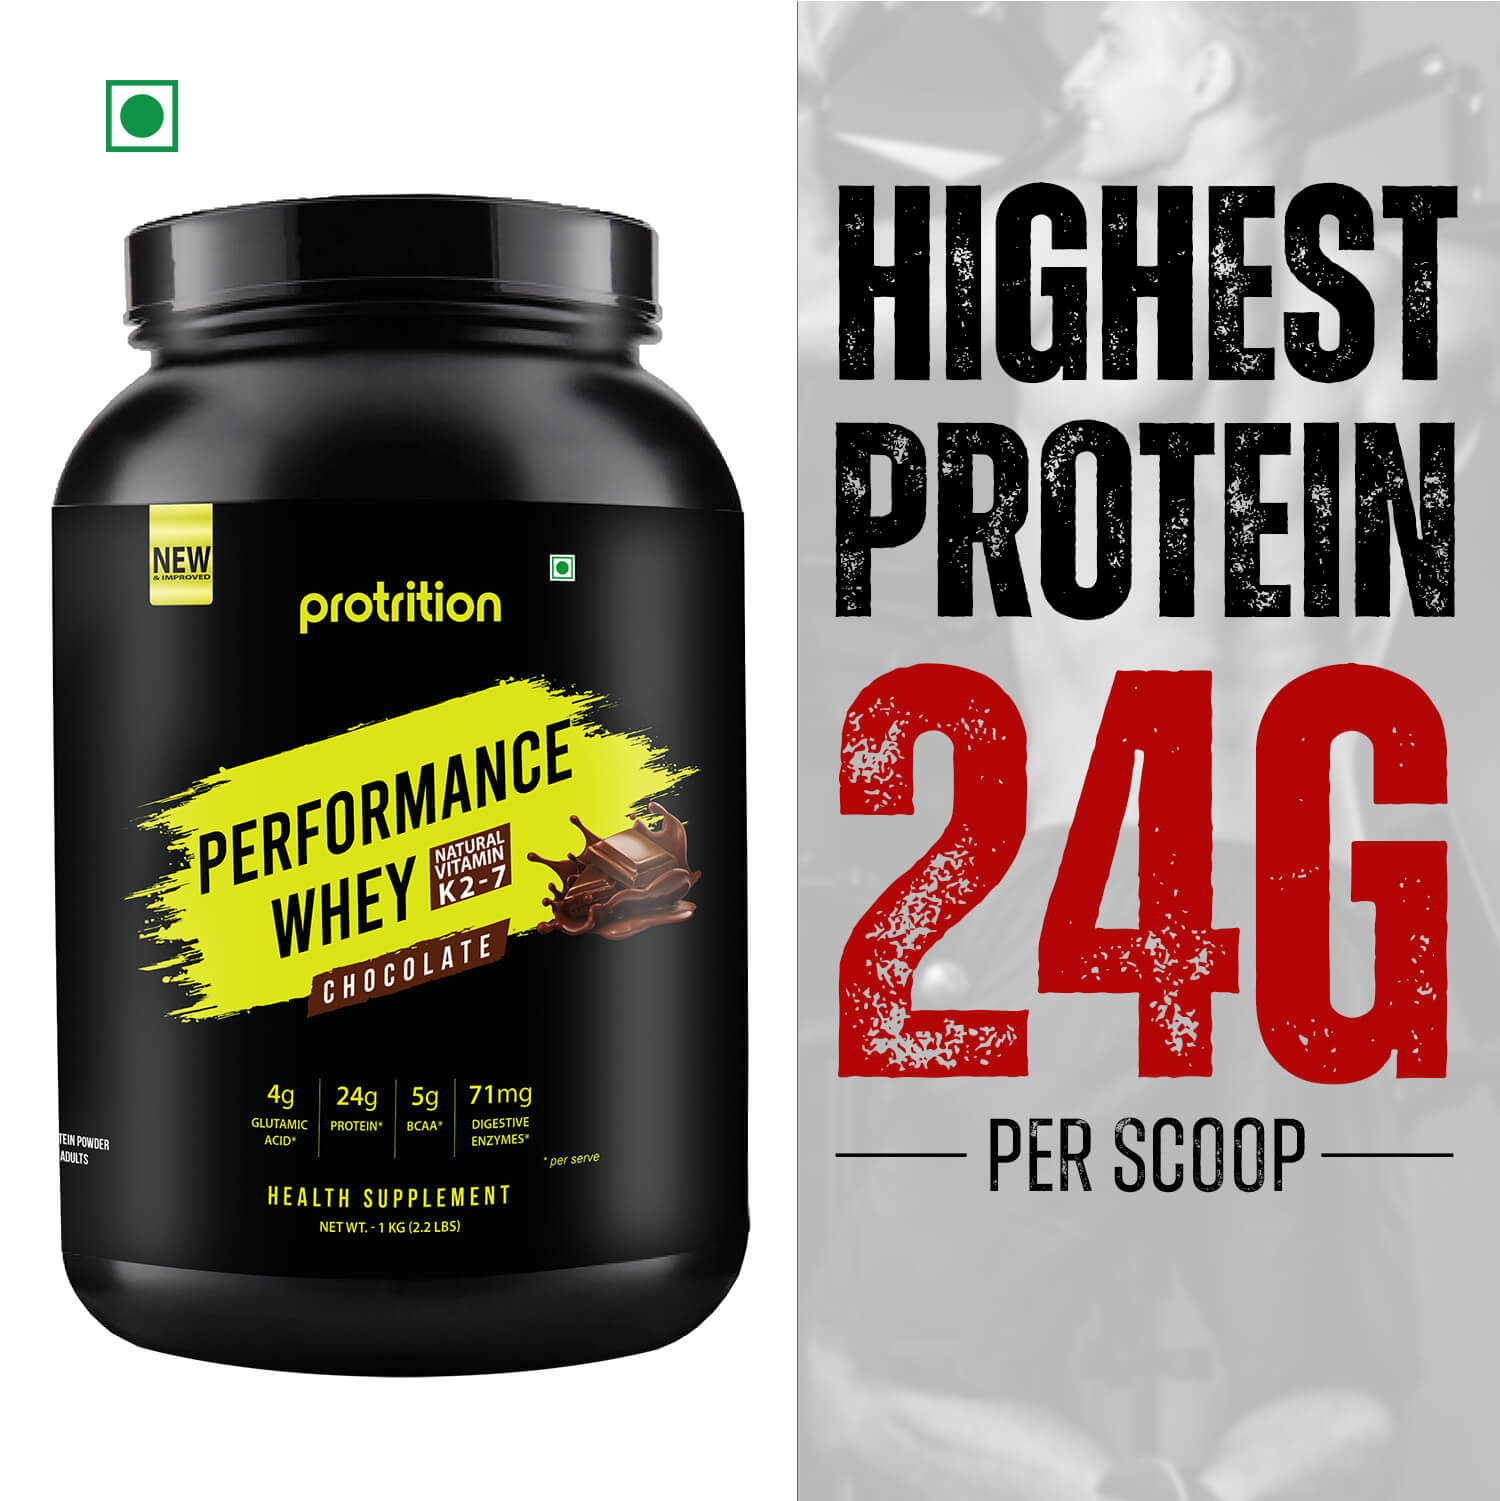 Protrition Performance Whey Protein, 1Kg, Chocolate